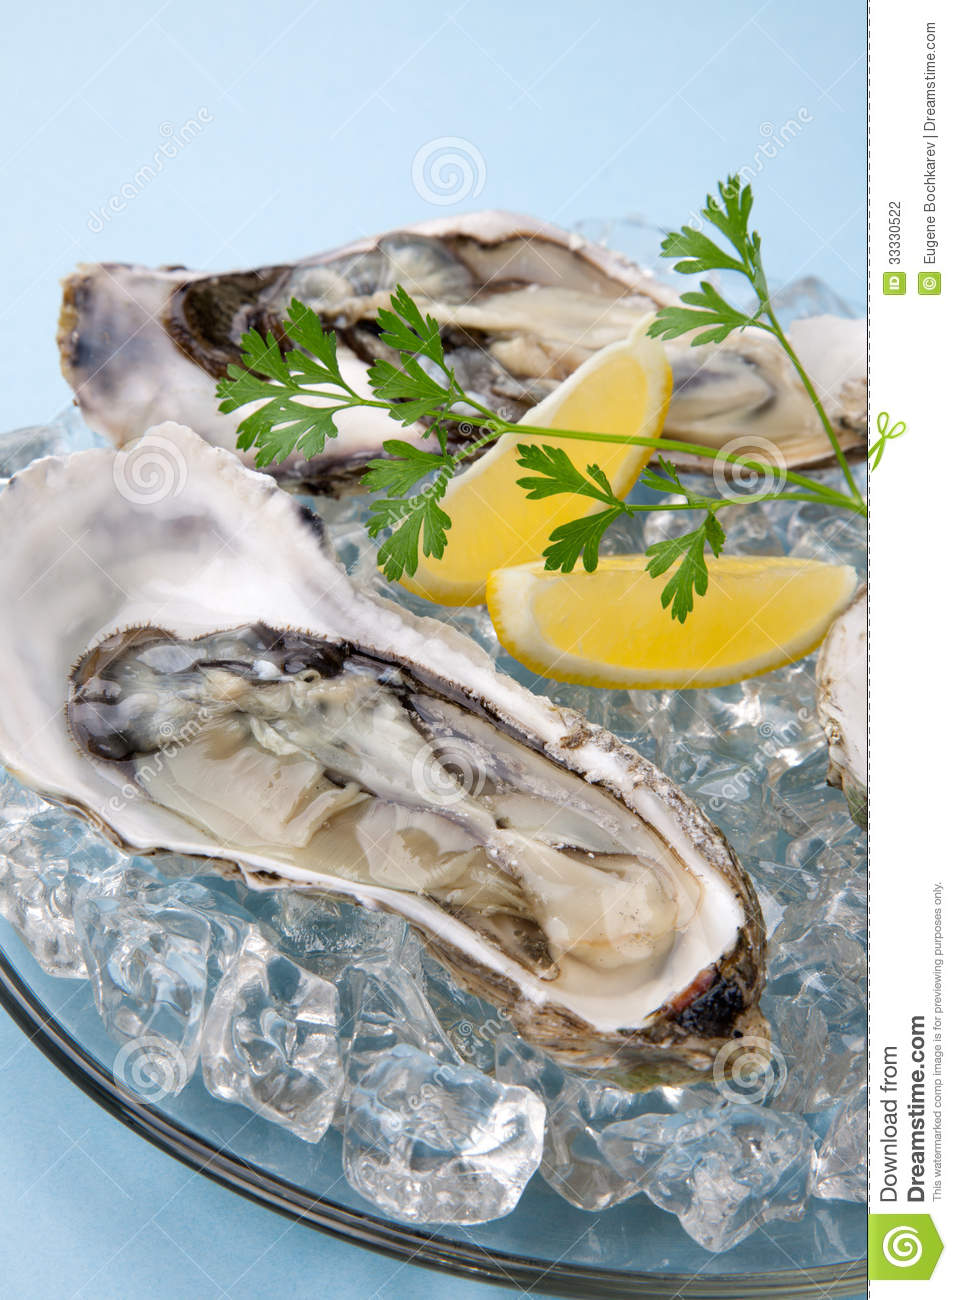 Oysters On Ice Garnished With Lemon And Parsley Over Light Blue